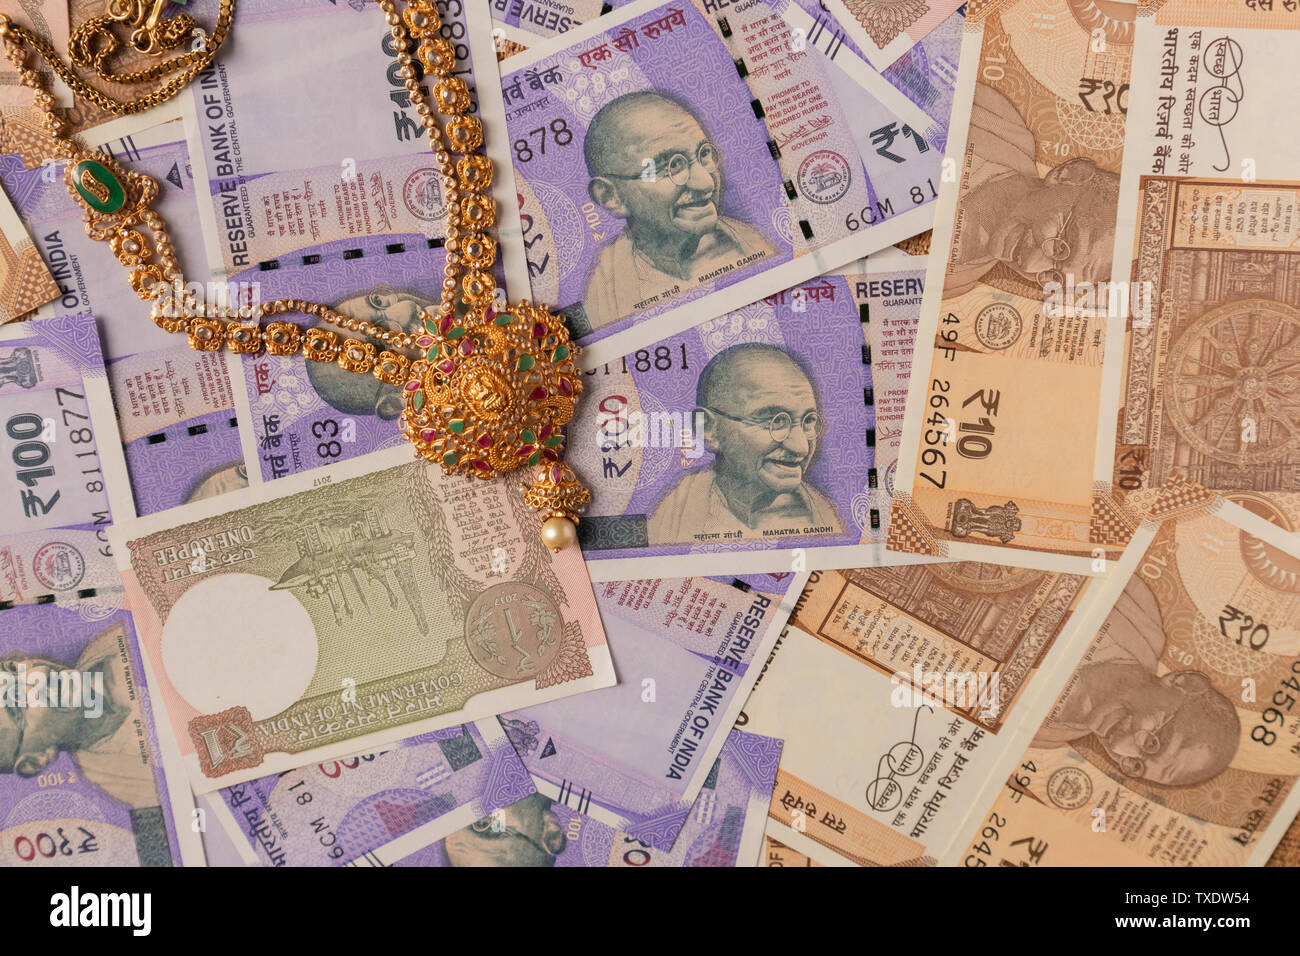 Concept of black money, IT raid, confiscated Money showing Indian currency notes with jewelry. Stock Photo